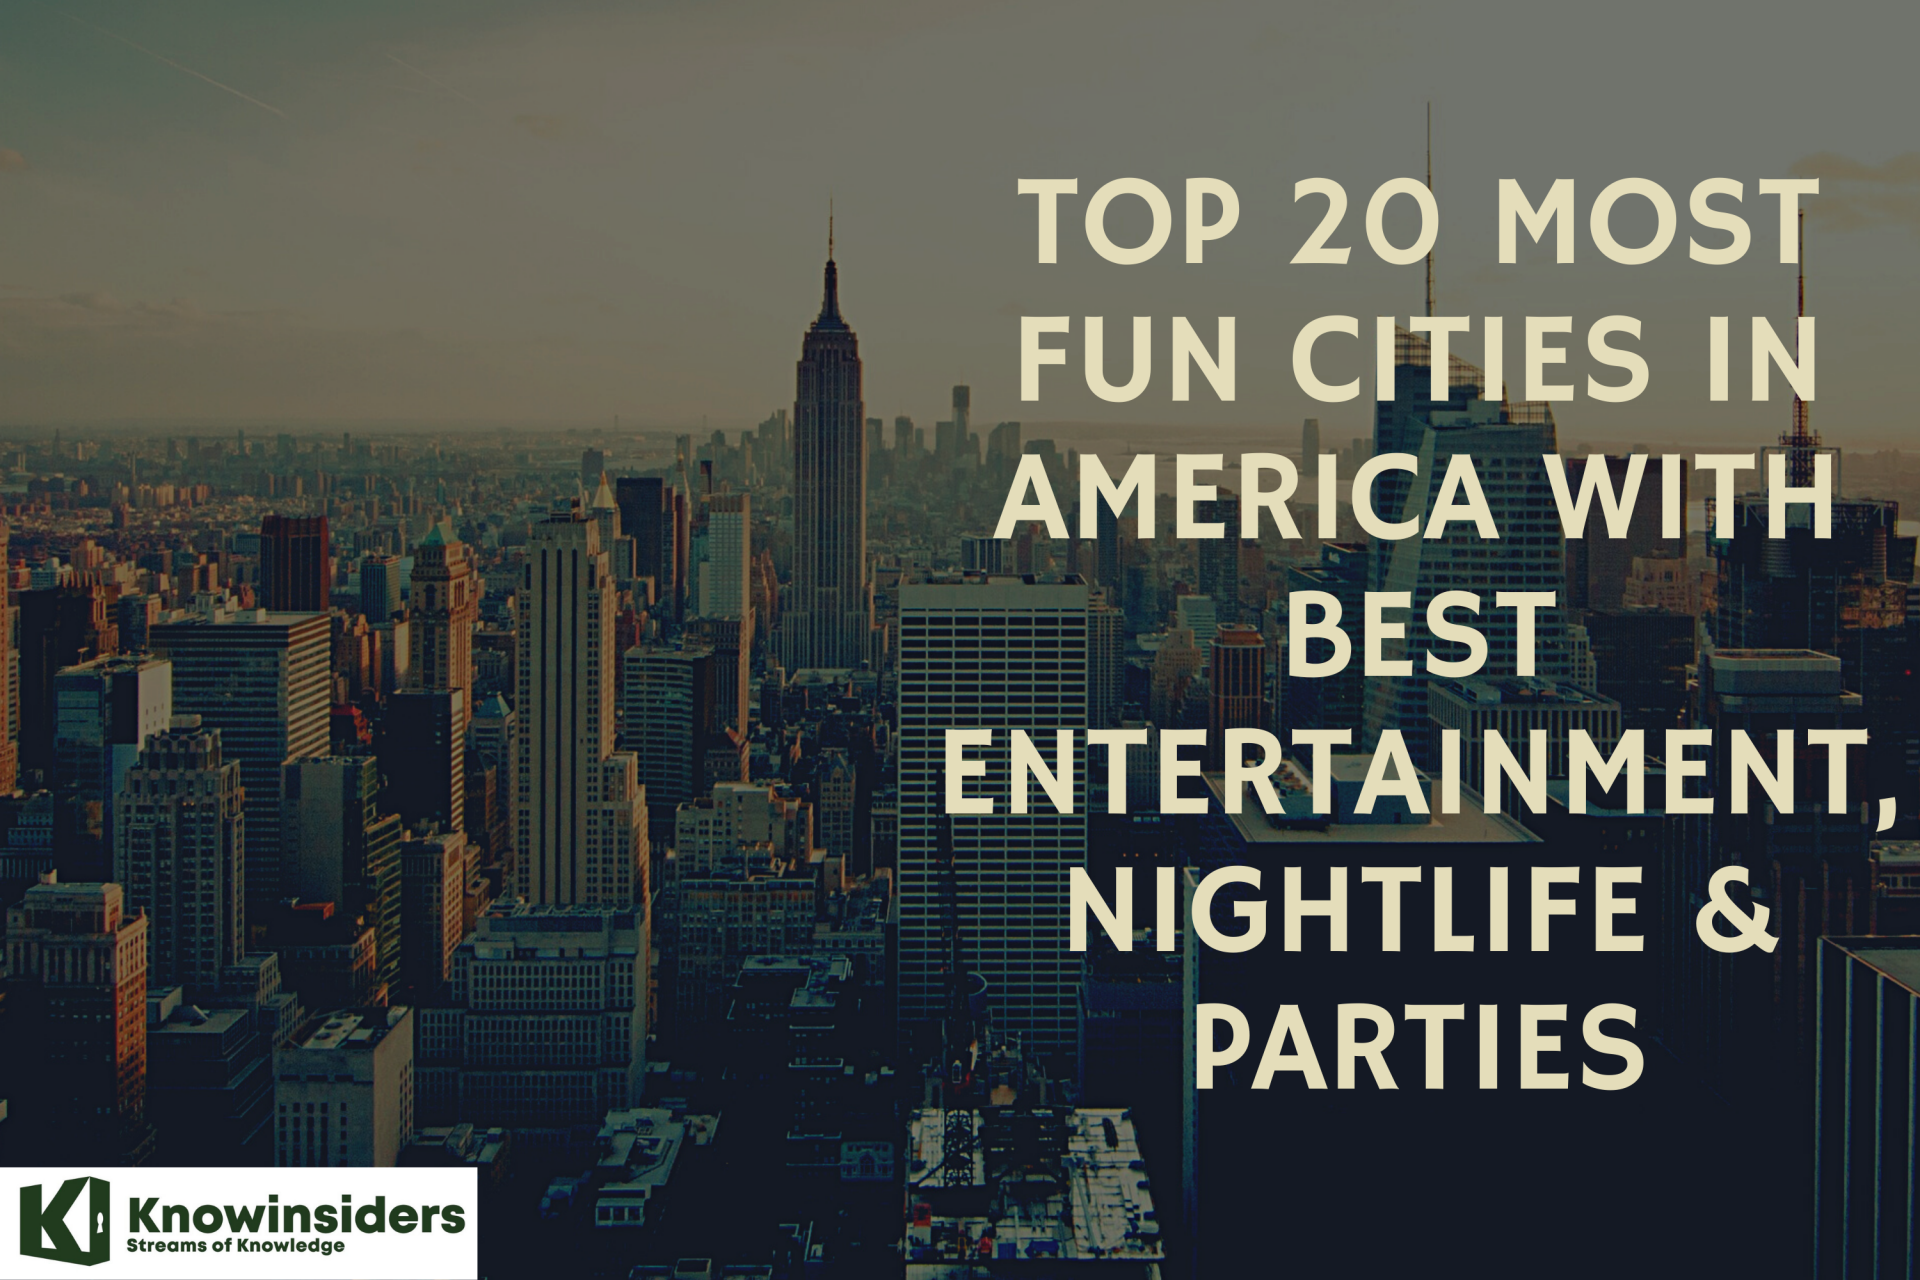 Top 20 Most Fun Cities in America with Best Entertainment, Nightlife & Parties